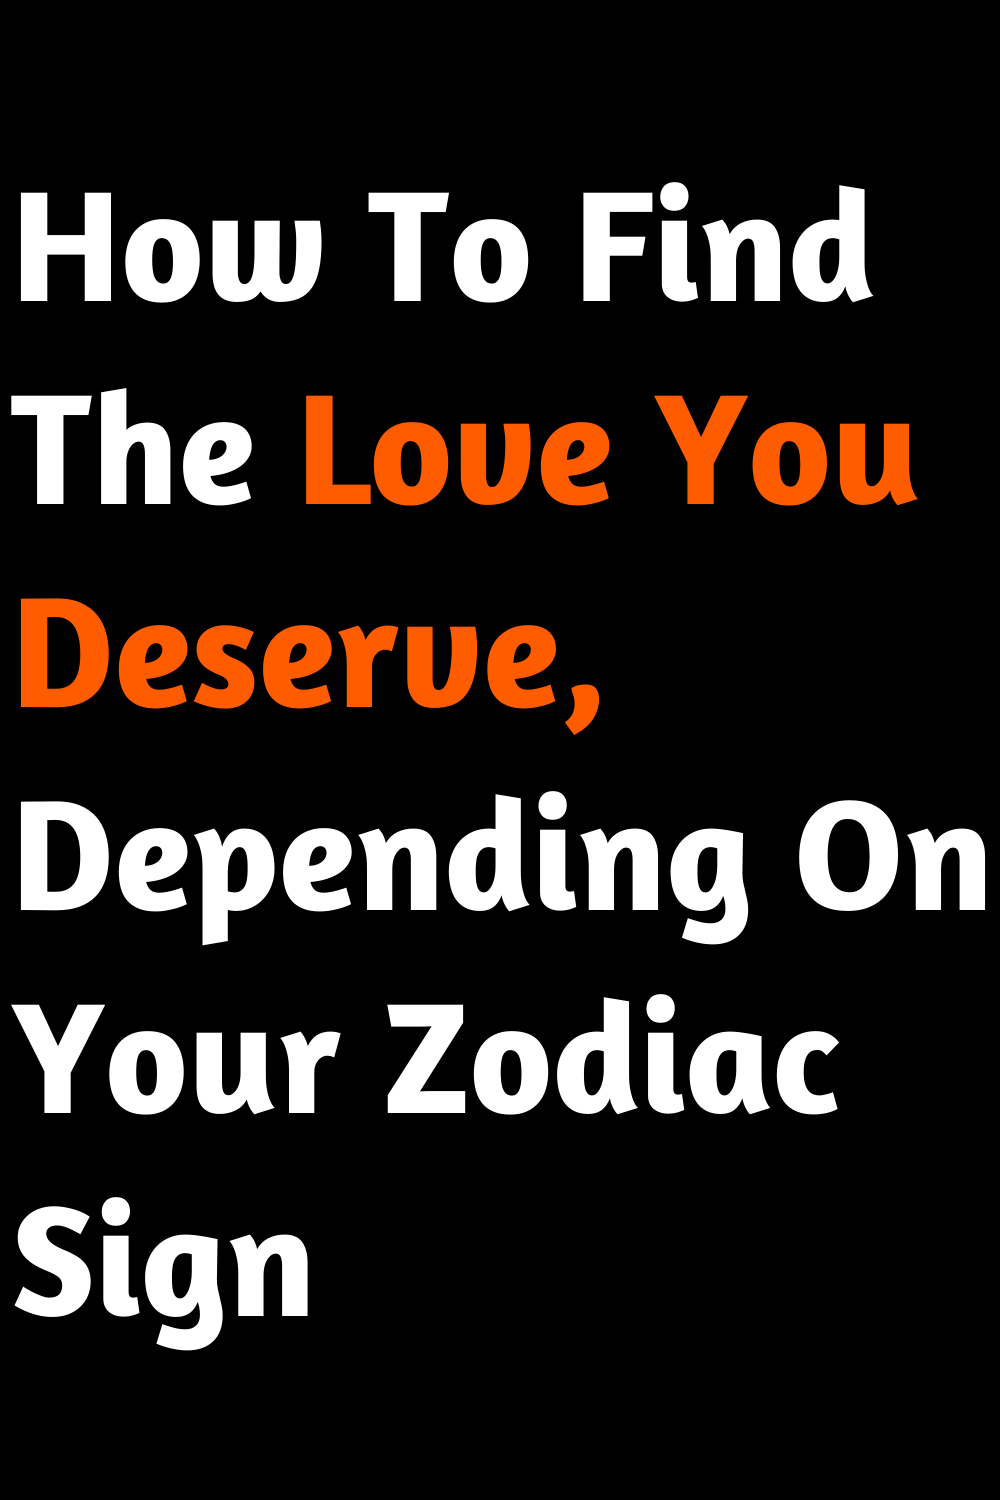 How To Find The Love You Deserve, Depending On Your Zodiac Sign